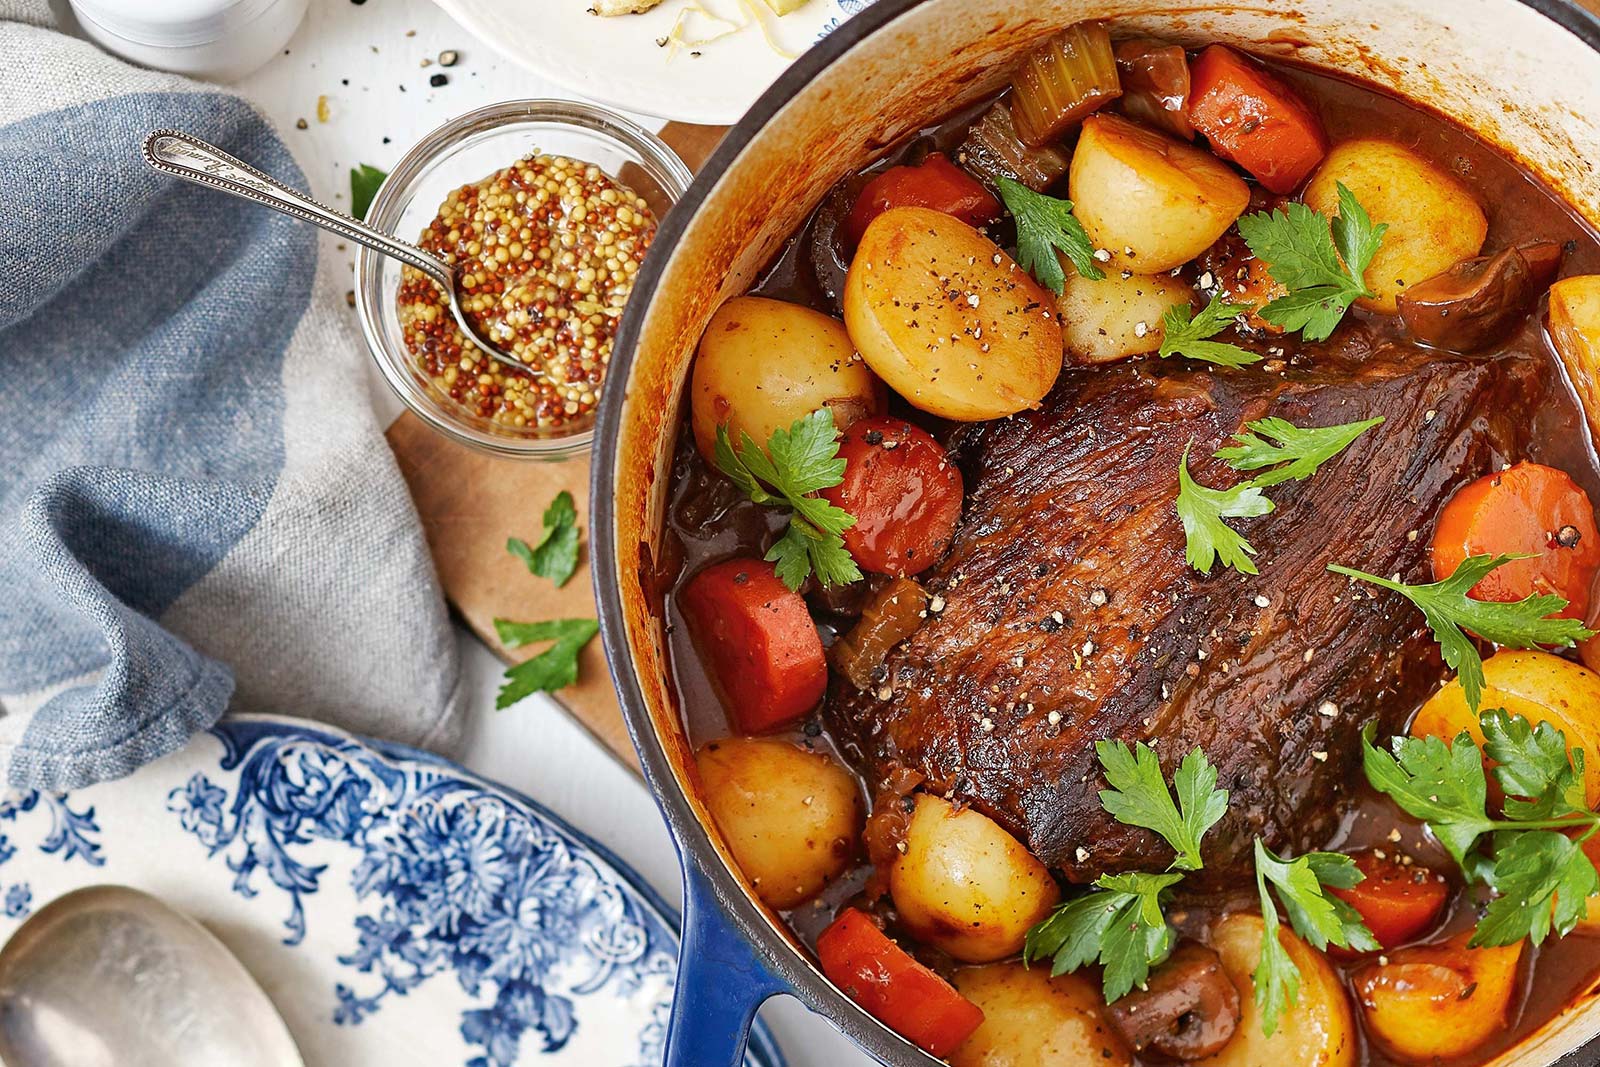 🍖 Can We Guess Your Age and Gender Based on the Meats You’ve Eaten? Pot Roast